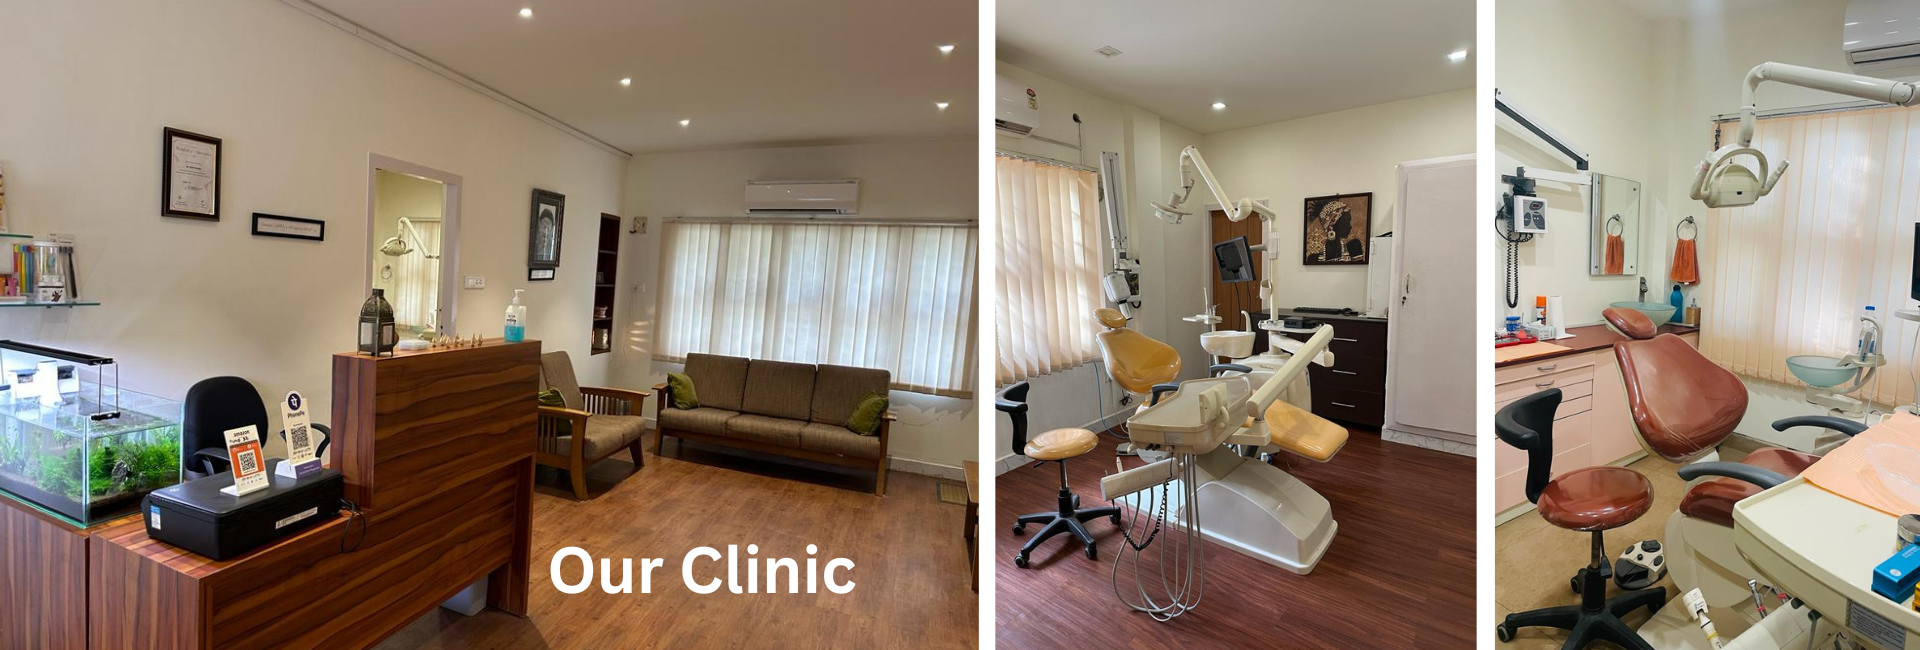 Our Clinic